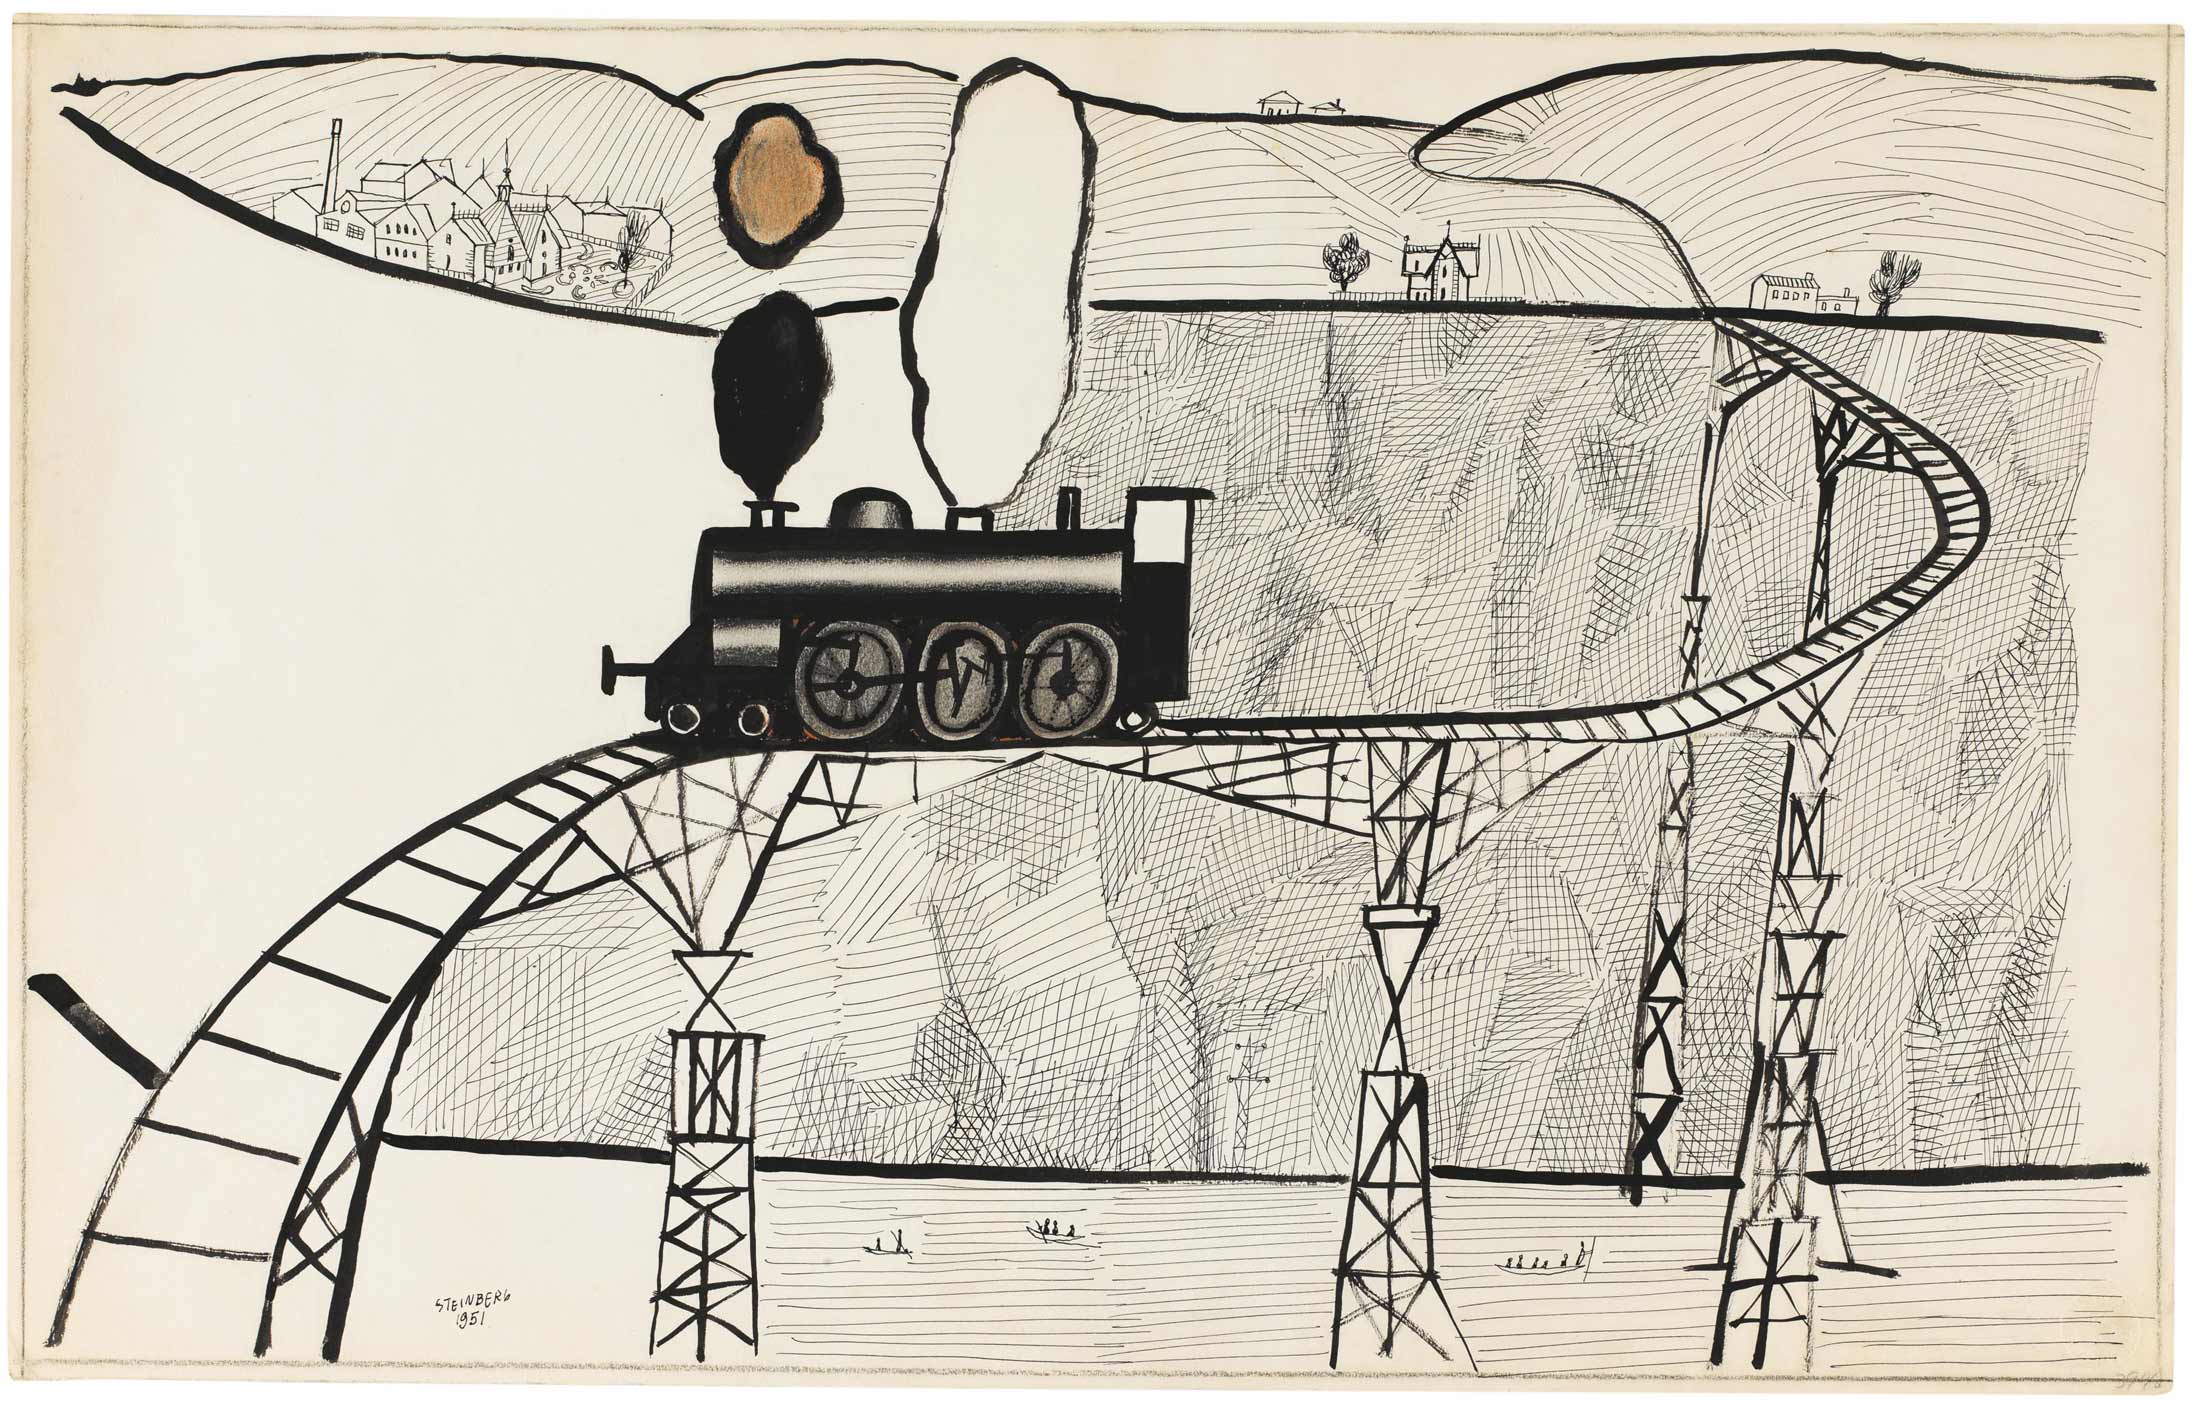 <em>Train</em>, 1951. Ink, crayon, and pencil on paper, 14 ½ x 23 in. The Saul Steinberg Foundation.